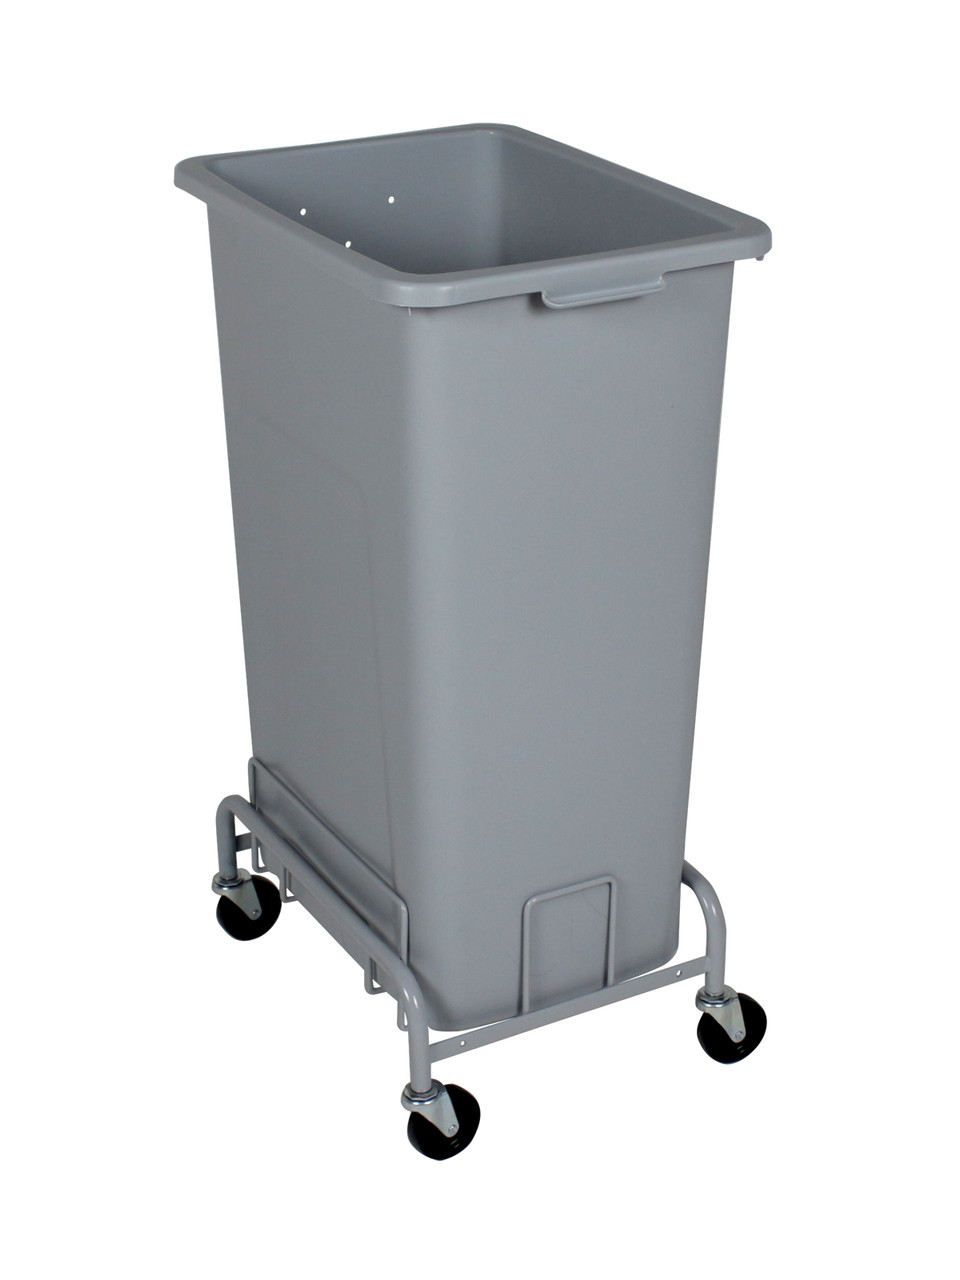 32 Gallon Plastic Extra Large Trash Can with Wheels (4 Color Choices)